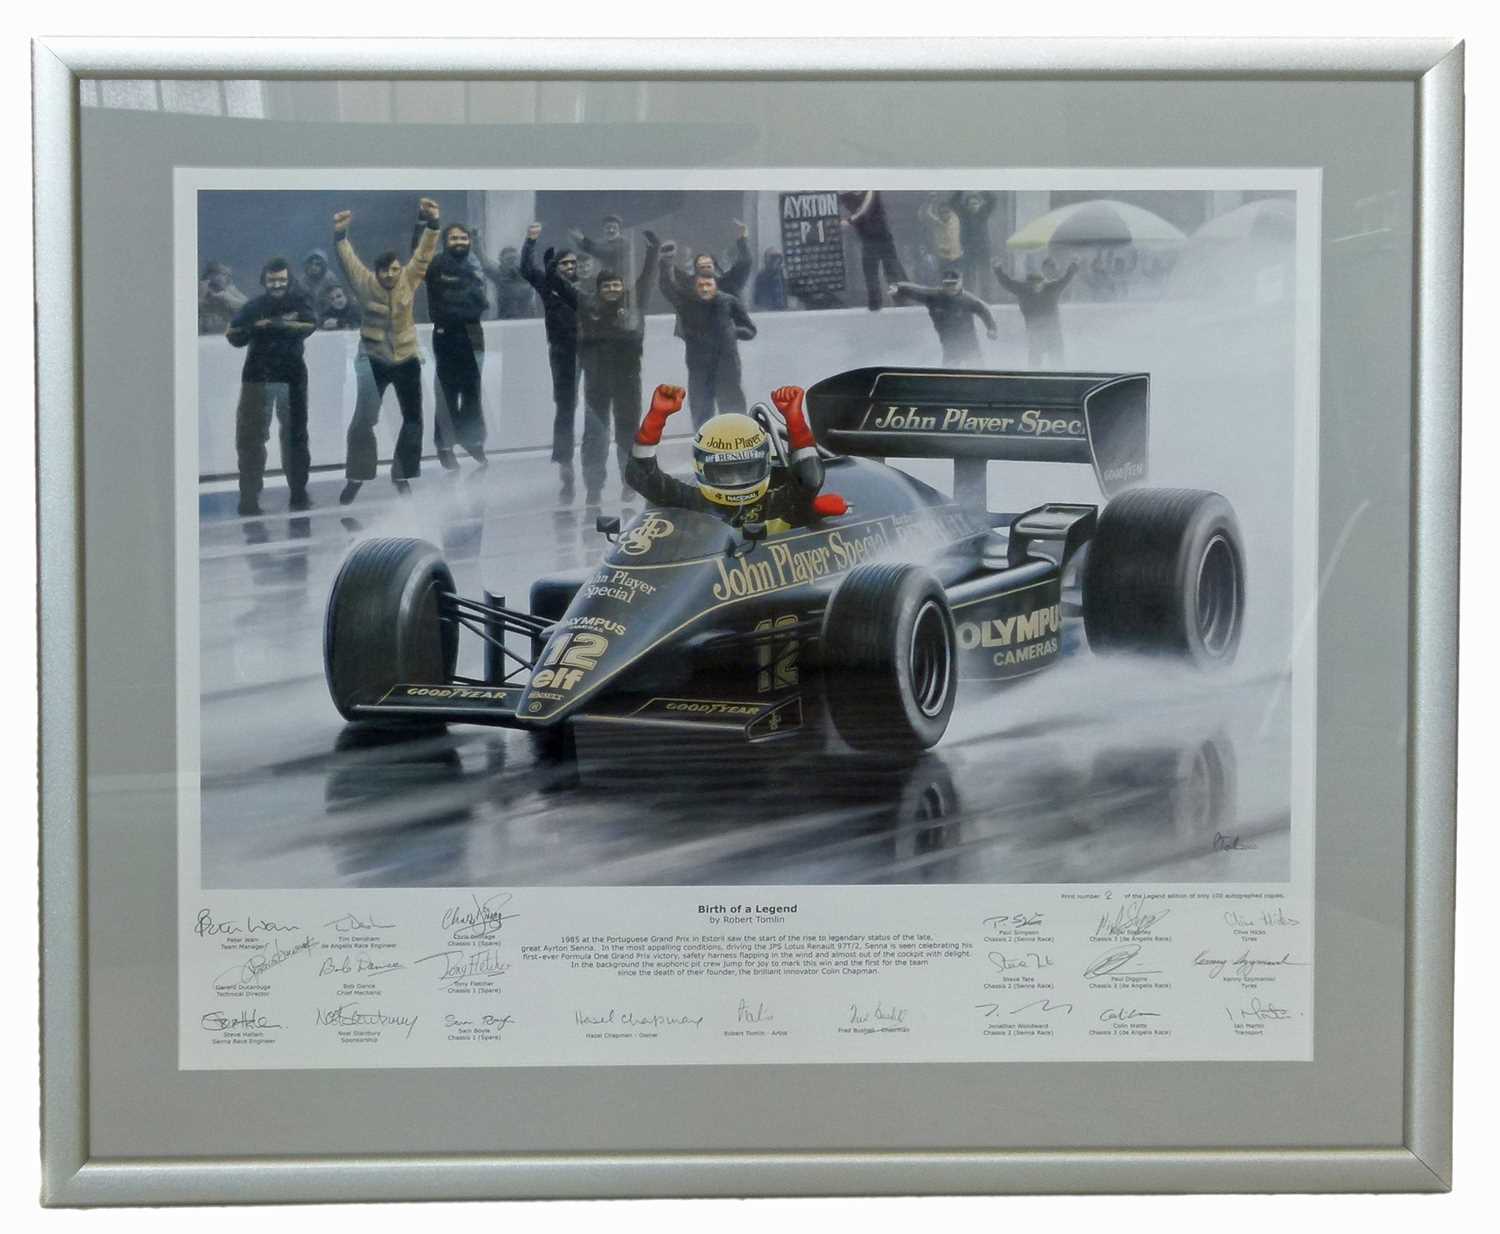 Lot 9 - "Birth of a Legend" Senna in JPS Lotus, signed by the race team.